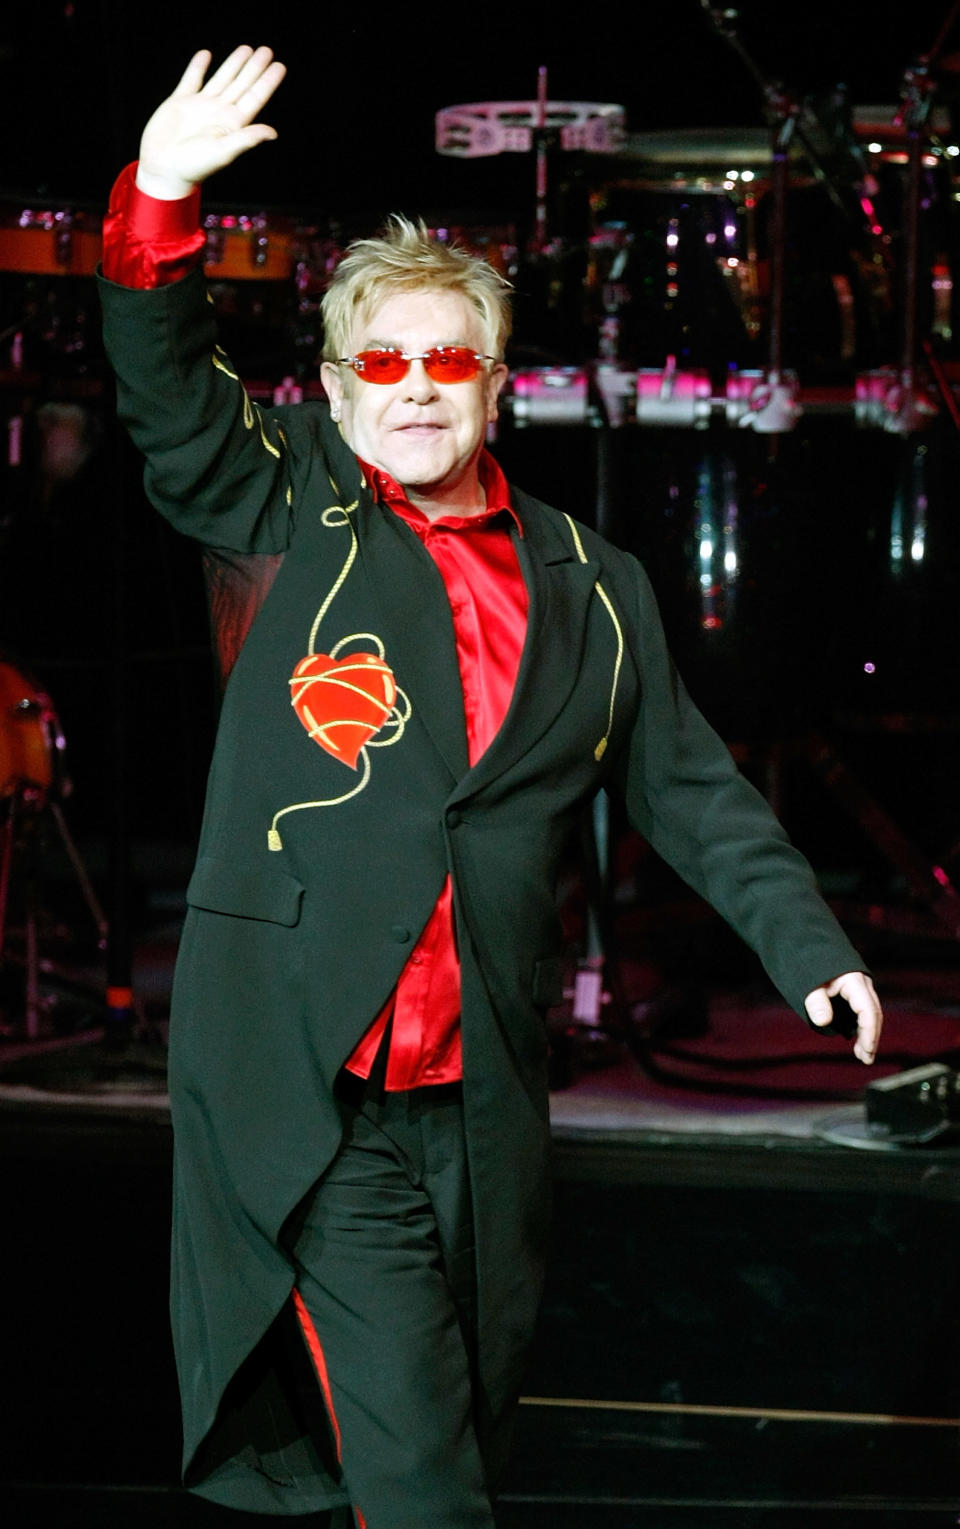 Elton John takes a curtain call at the end of the final performance of his show "The Red Piano" at The Colosseum at Caesars Palace in 2009 in Las Vegas.